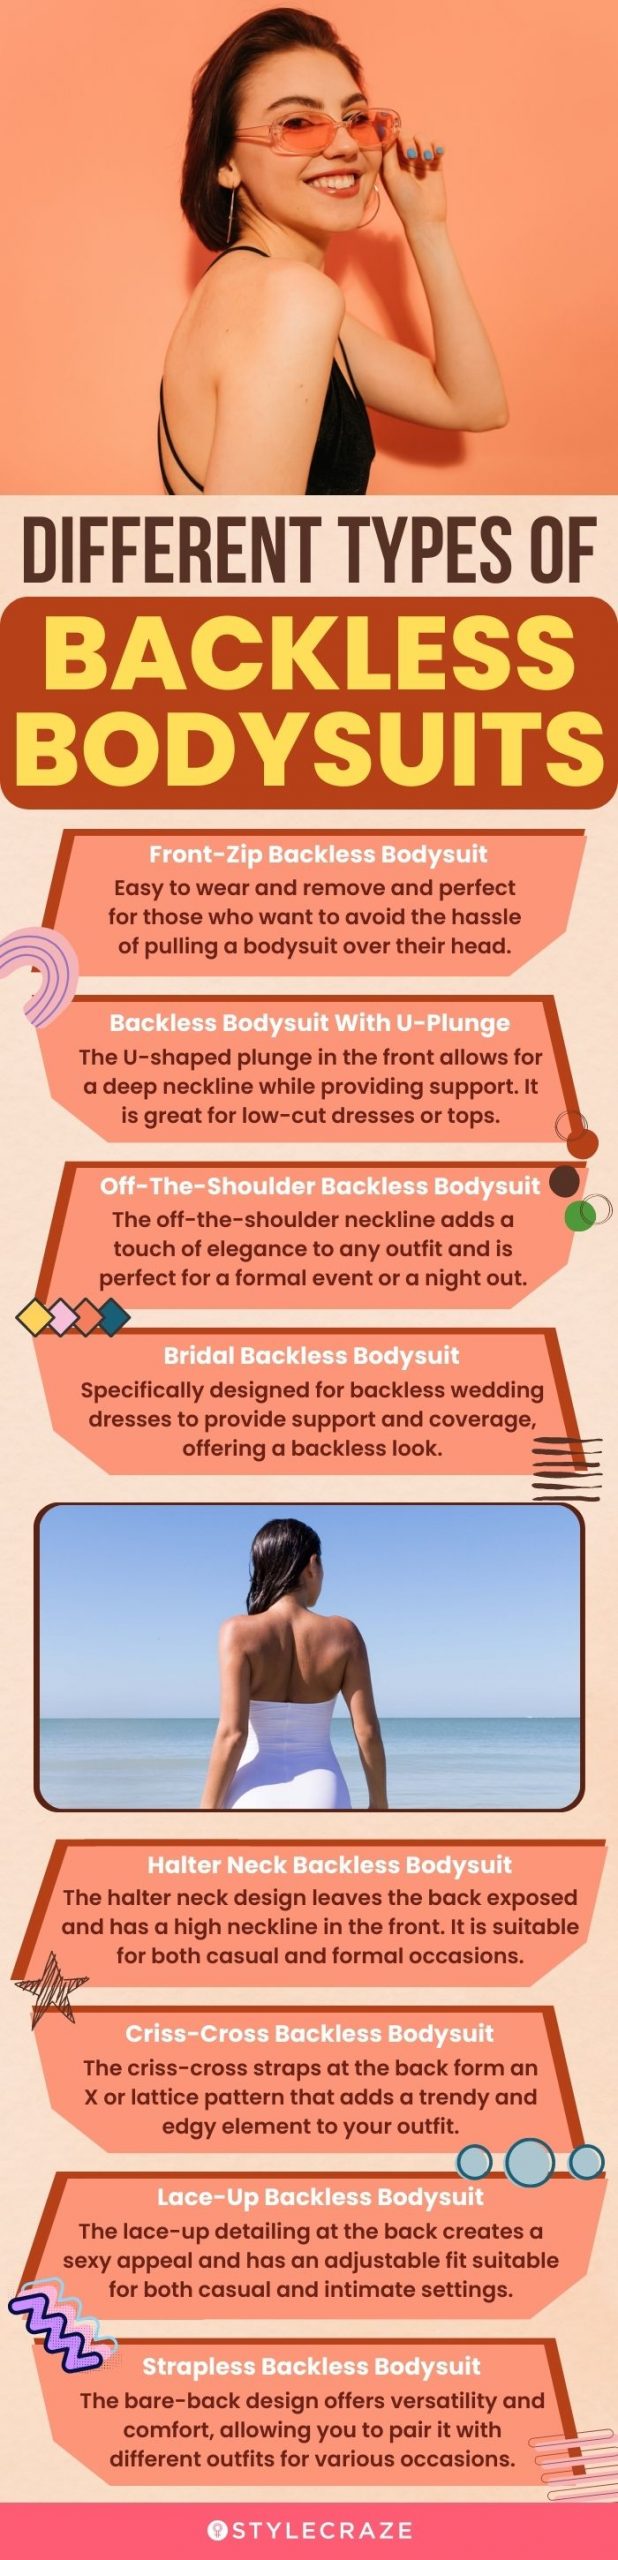 Different Types Of Backless Bodysuits (infographic)